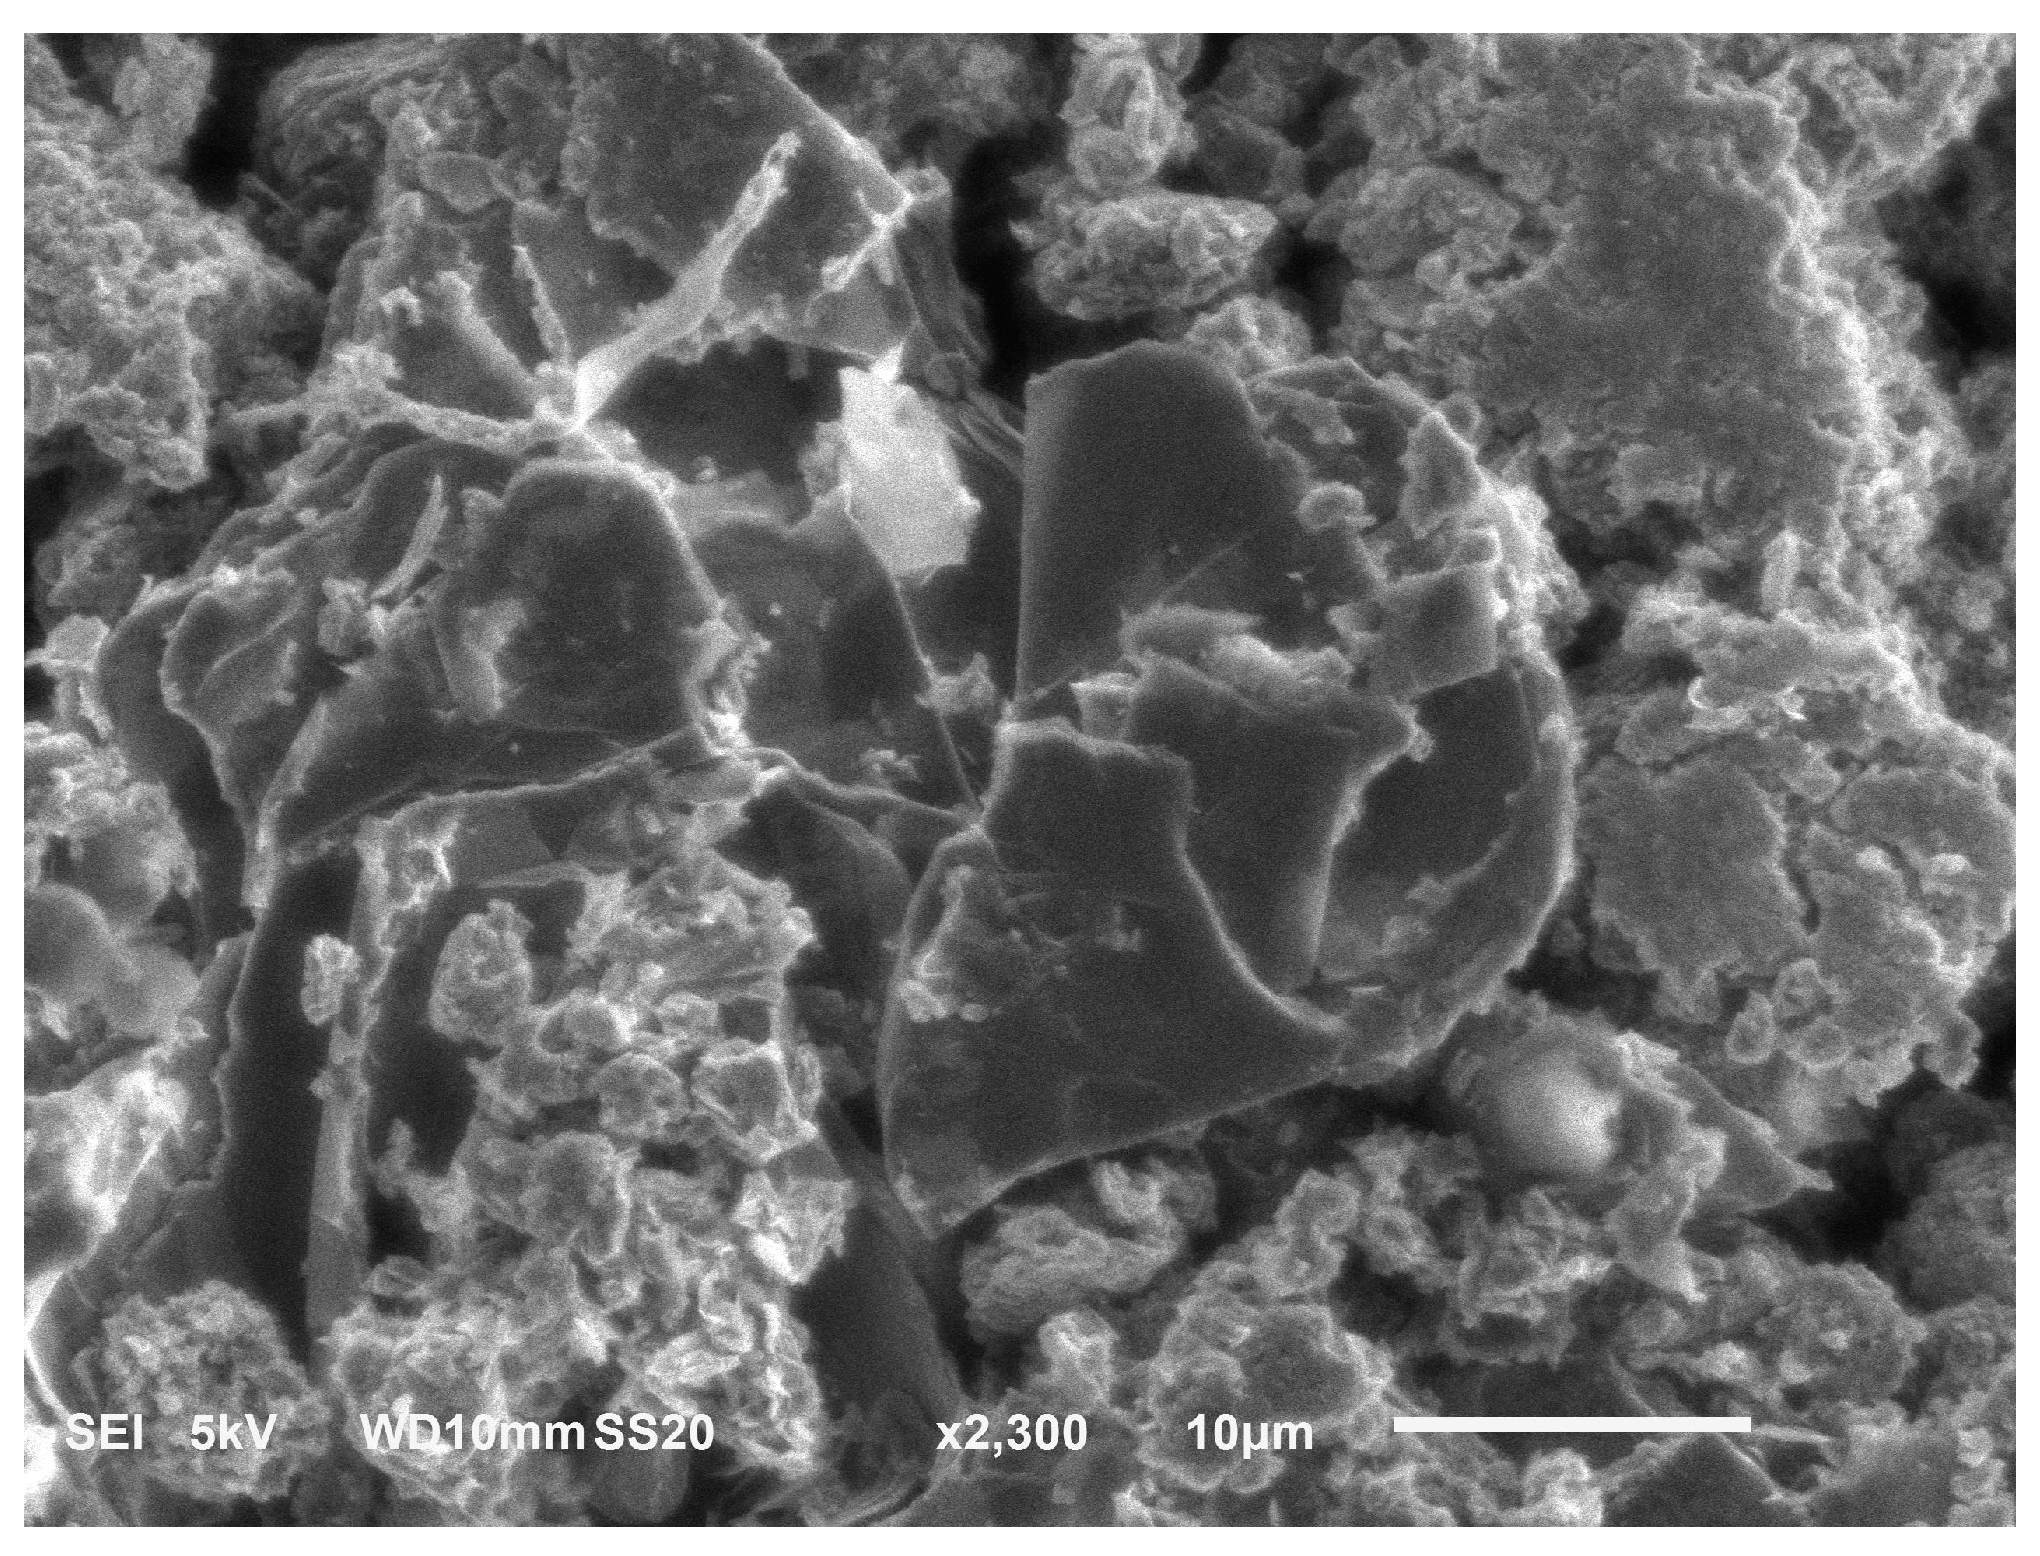 Processes | Free Full-Text | Graphene Oxide from Graphite of Spent 